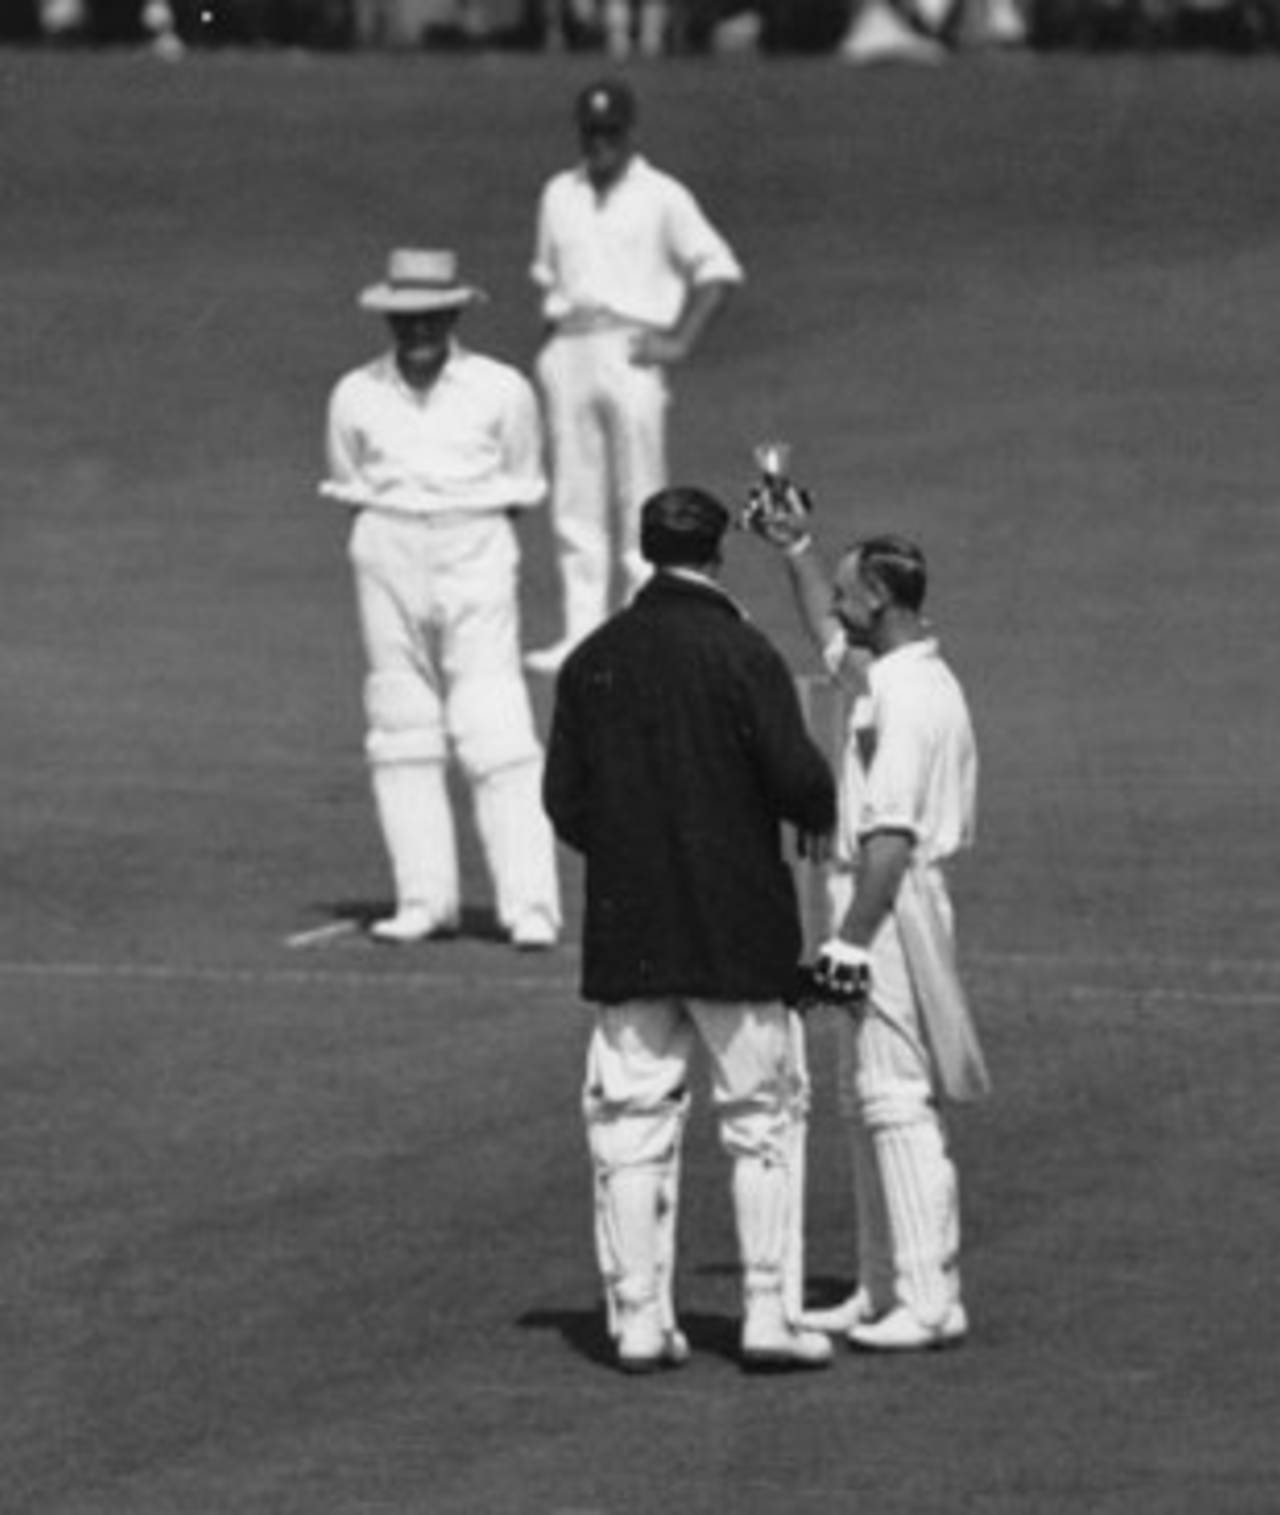 Hobbs toasts the crowd after equalling WG Grace's record of 124 first-class centuries, in 1925&nbsp;&nbsp;&bull;&nbsp;&nbsp;Getty Images